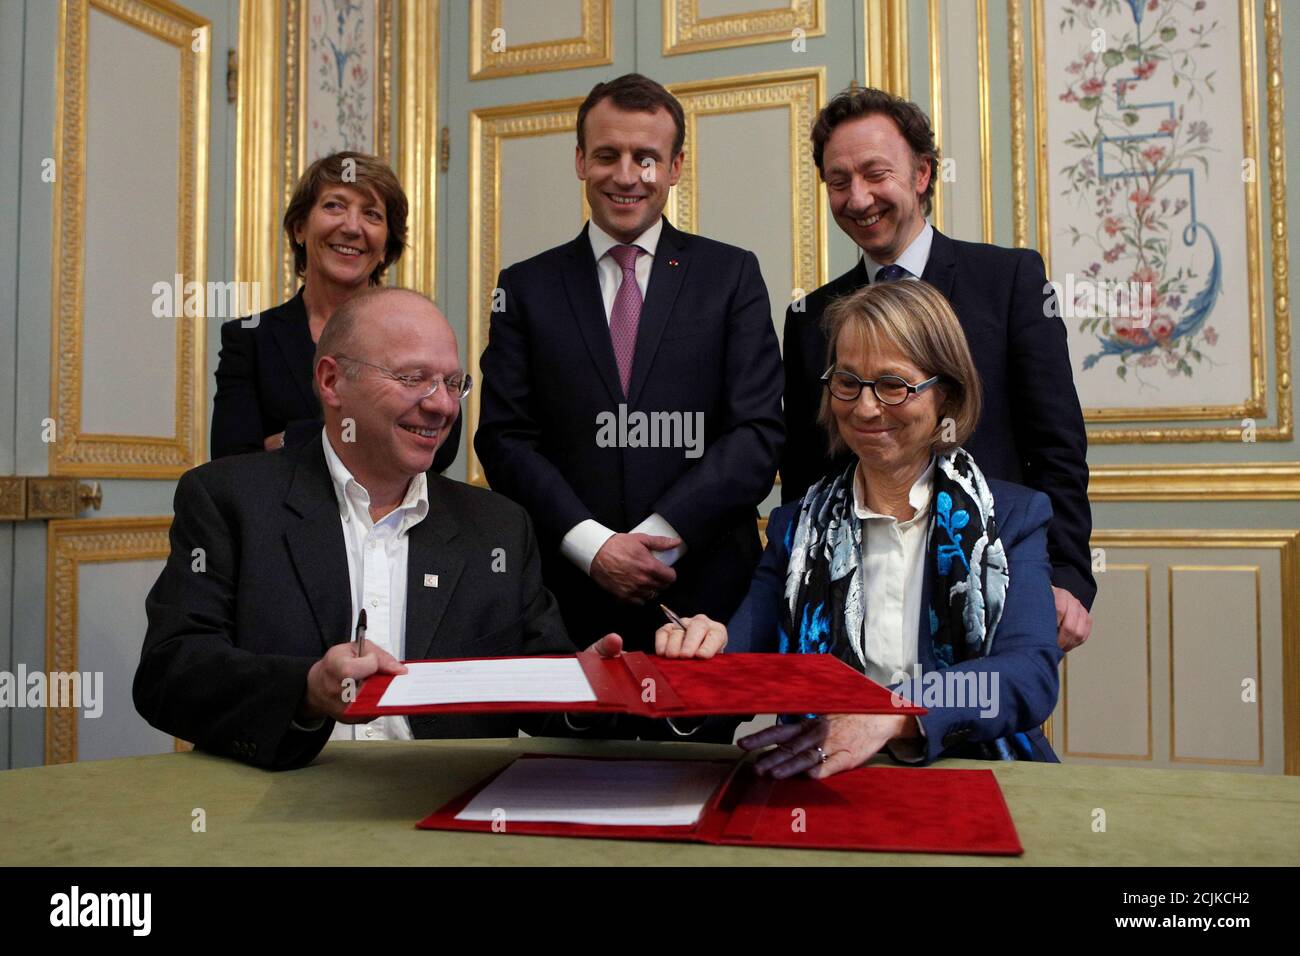 French Culture Minister Francoise Nyssen (R) exchanges a signature agreement with President of the Heritage Foundation Guillaume Poitrinal (L) as French President Emmanuel Macron (C) flanked with Stephan Pallez, President of the French Lottery 'Francaise des Jeux' (L) and French TV host Stephane Bern (R) look on during a cultural heritage agreement meeting at the Elysee Palace in Paris, France, February 13, 2018. REUTERS/Francois Mori/Pool Stock Photo